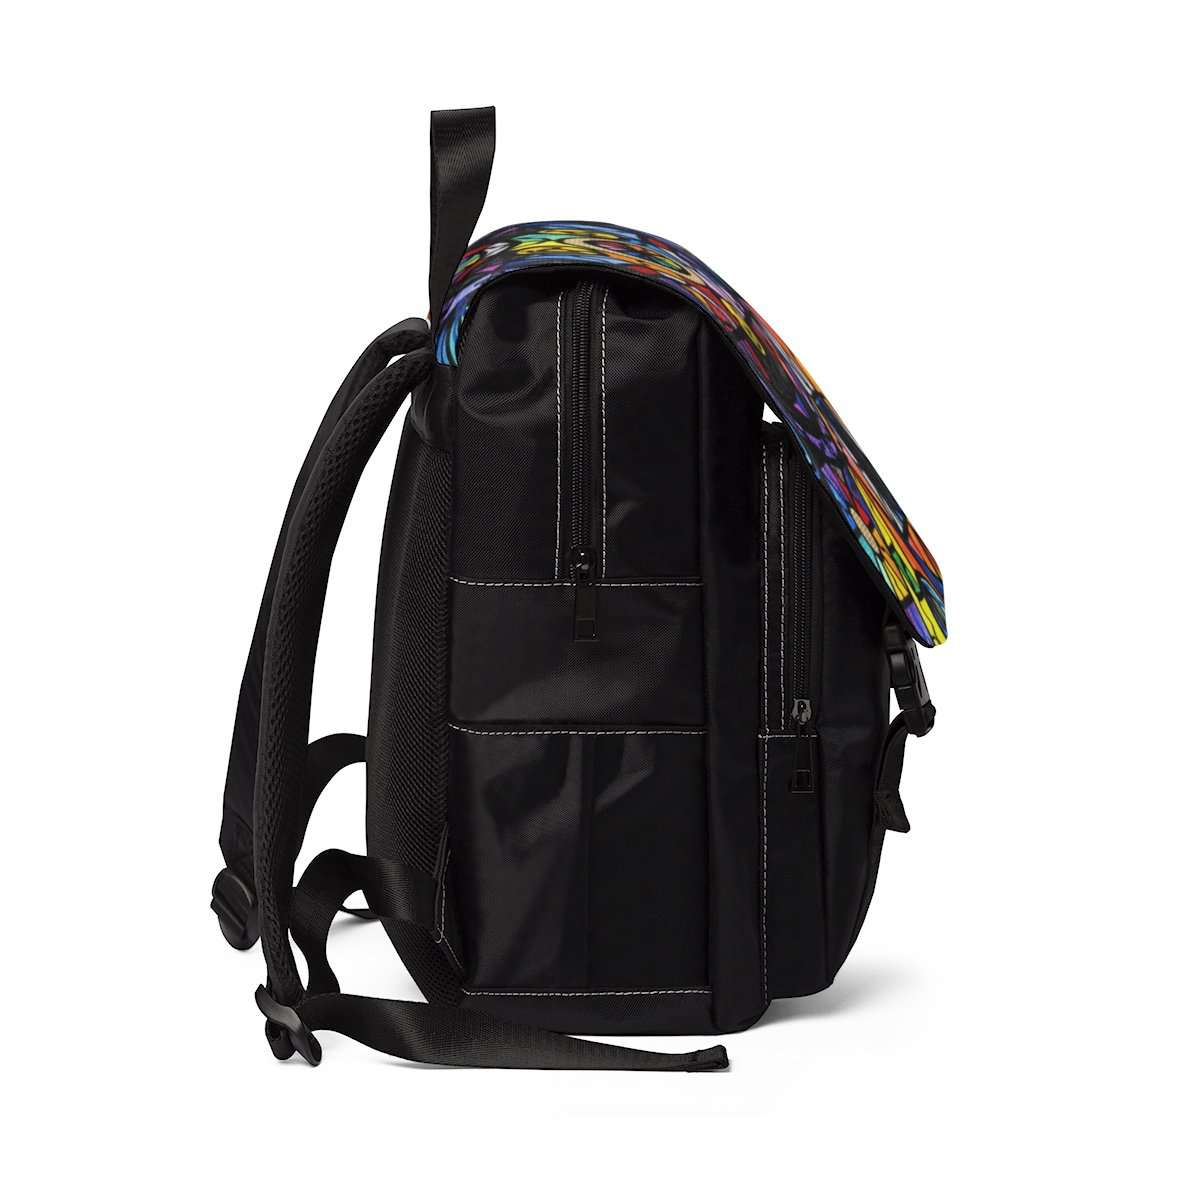 shop-for-the-latest-alchemy-unisex-casual-shoulder-backpack-online-now_1.jpg